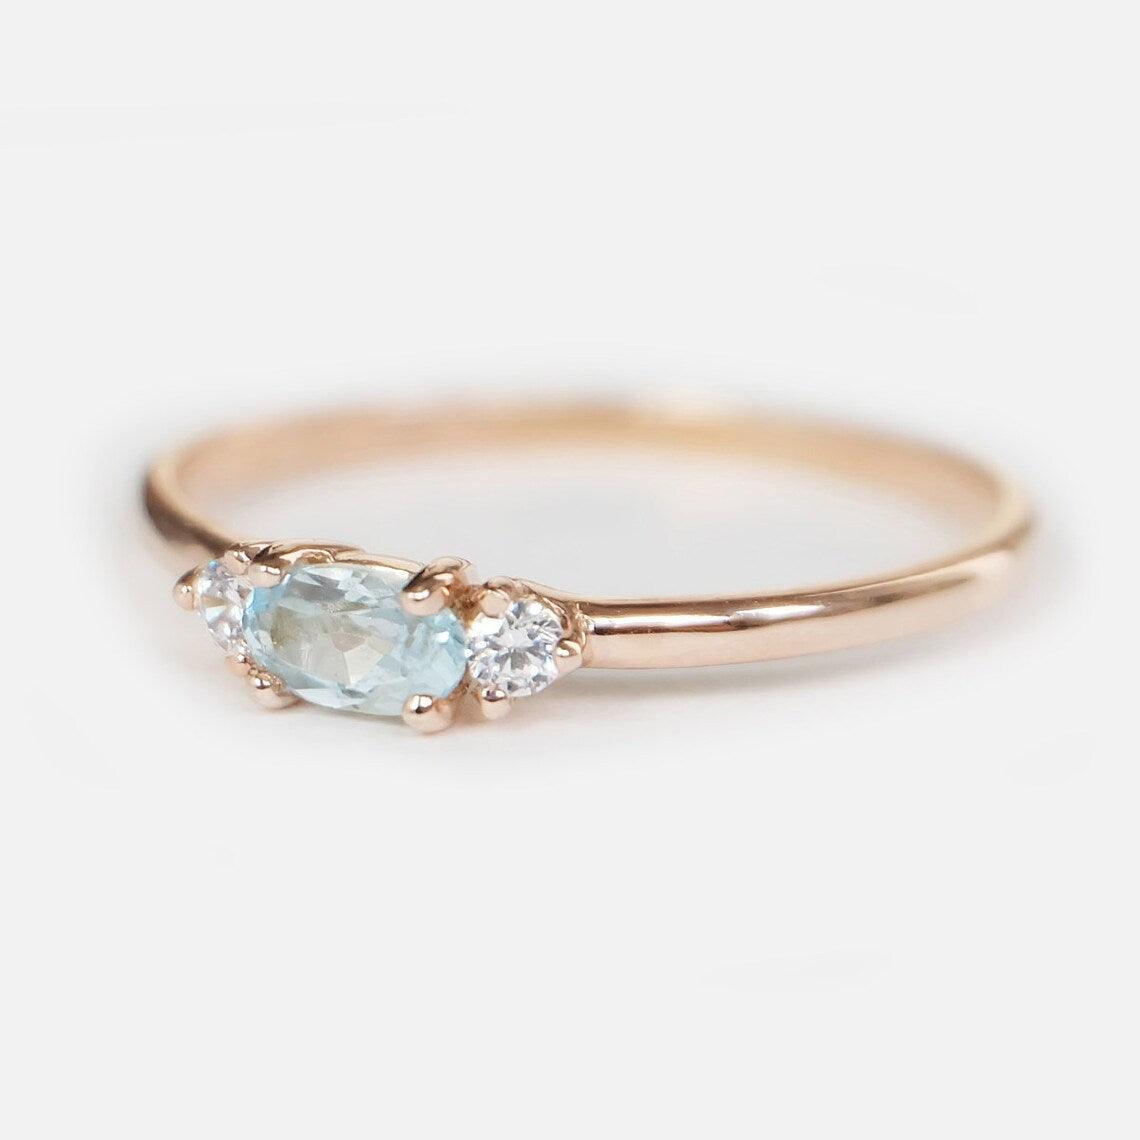 Aquamarine ring with diamonds angled to the viewer's left